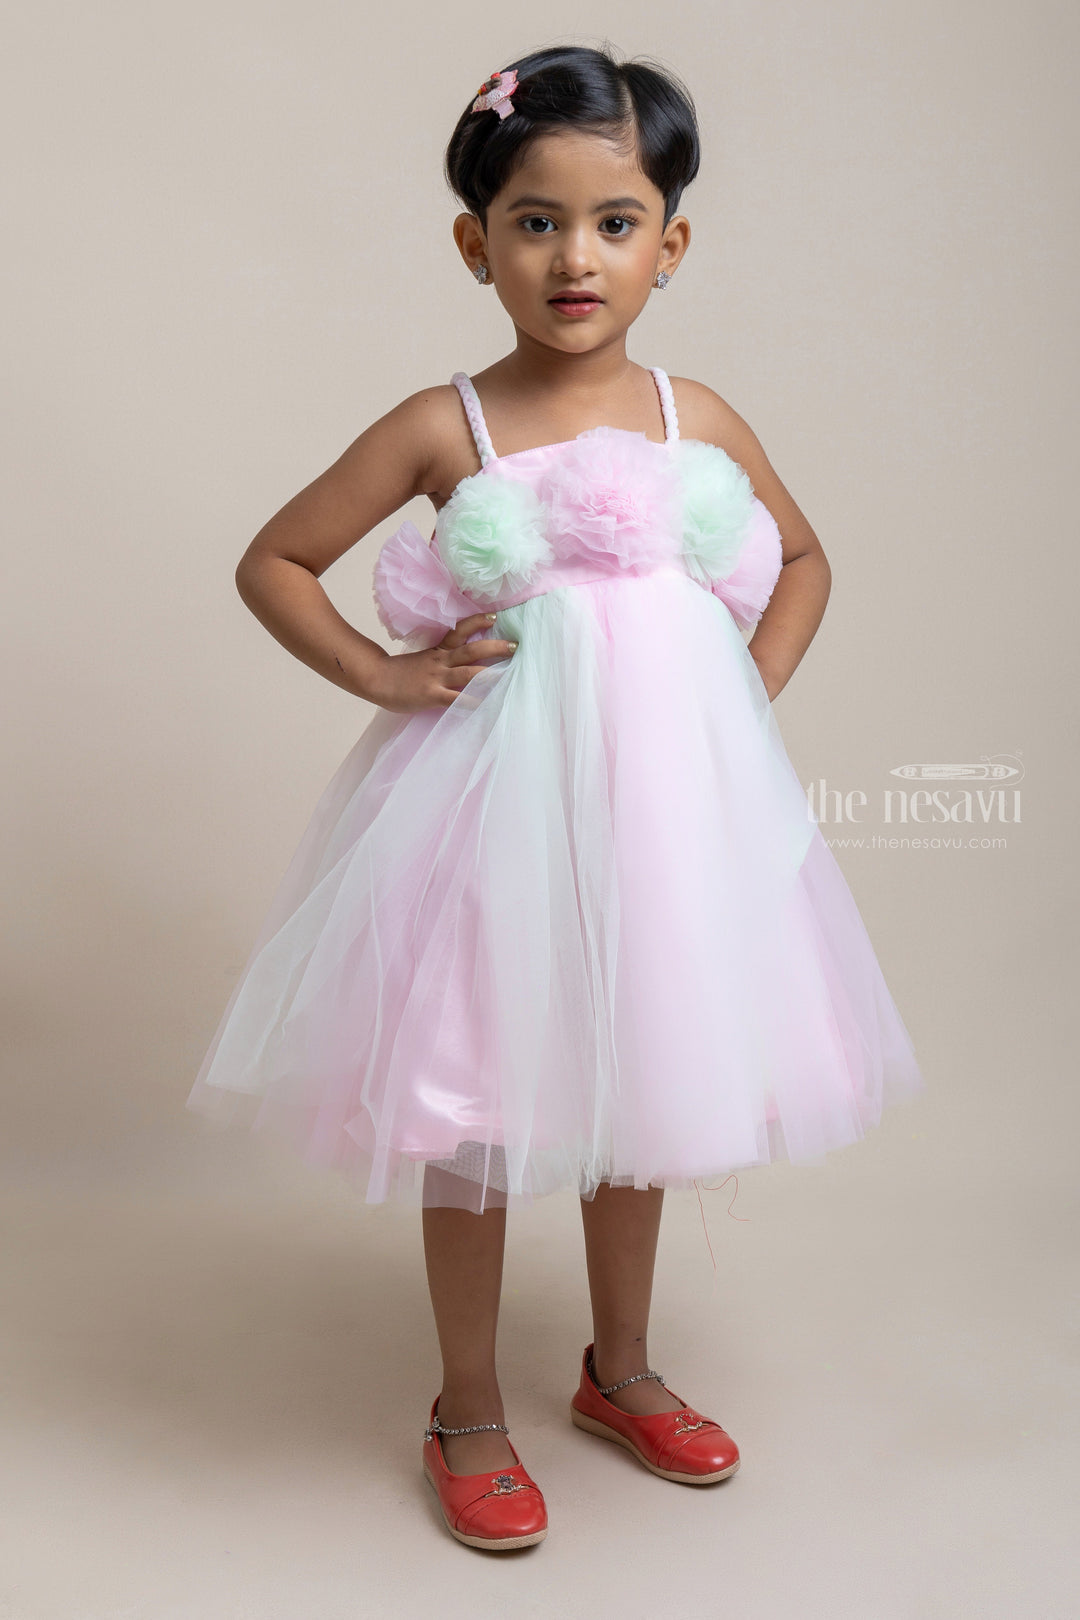 The Nesavu Girls Tutu Frock Lovely Pink And Green Puffed Floral Crafted Party Frock For First Birthday Nesavu 16 (1Y) / Pink PF116A-16 Lovely Pink Party Frock For Girls | Premium collection | The Nesavu